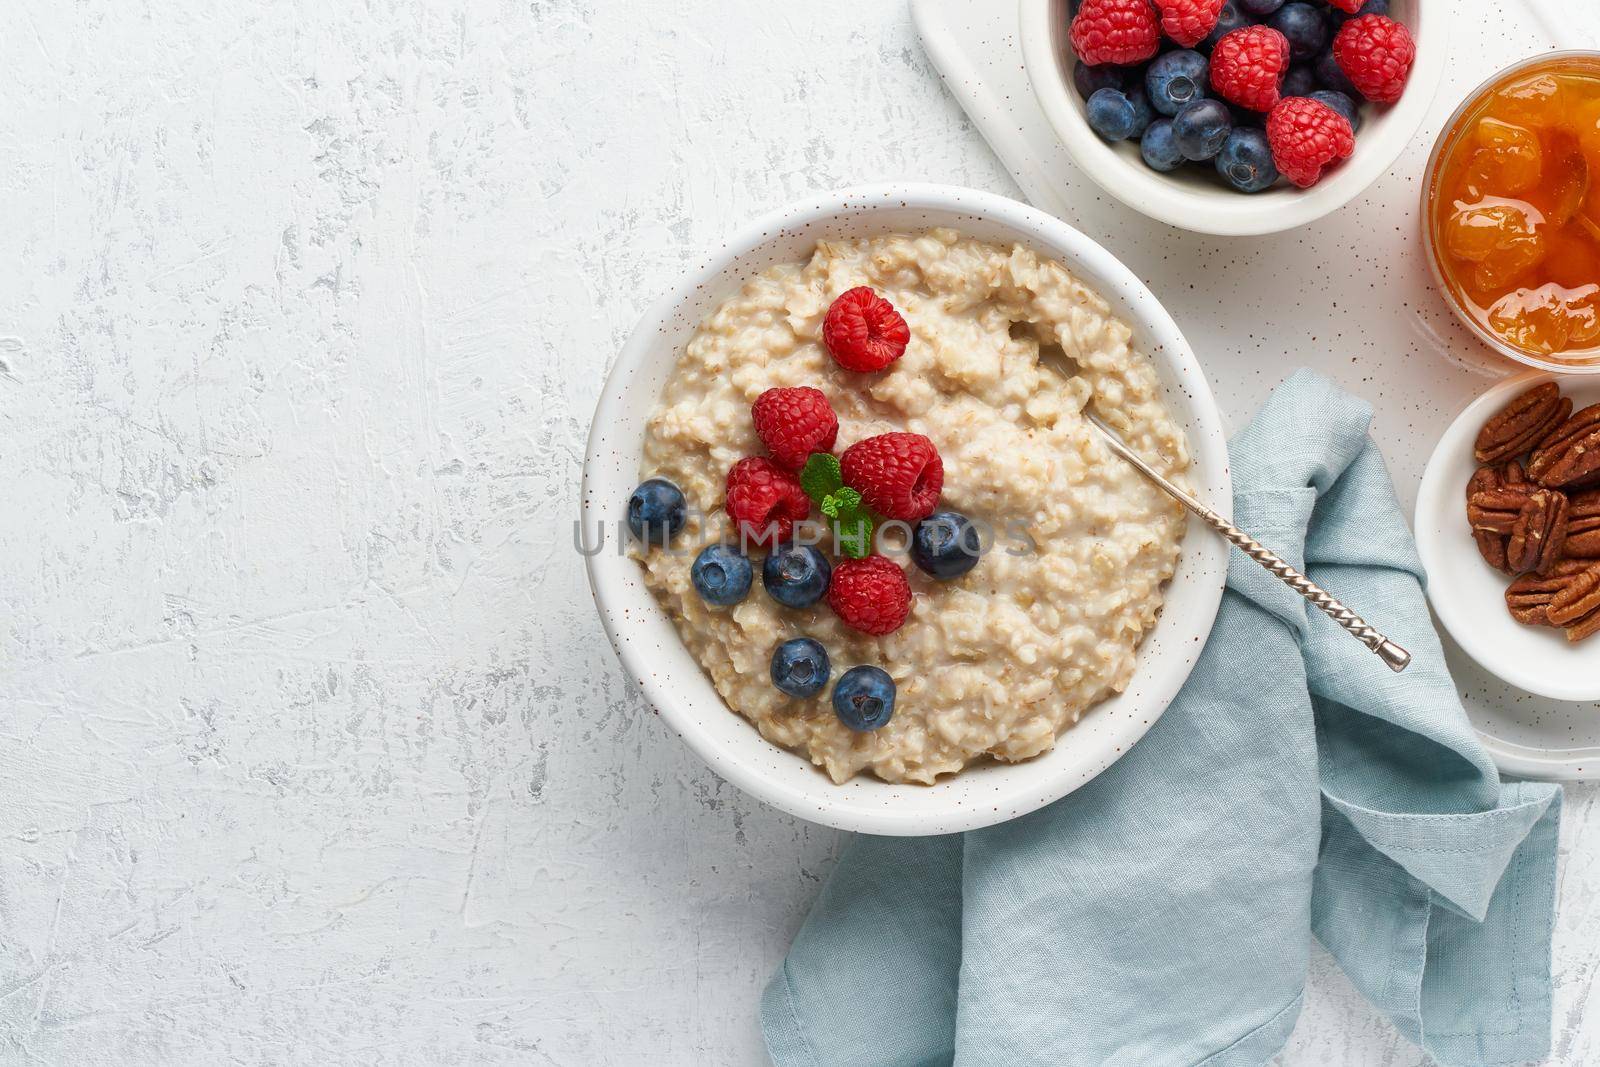 Oatmeal rustic porridge with blueberry, raspberries, jam and nuts in white bowl, dash diet by NataBene